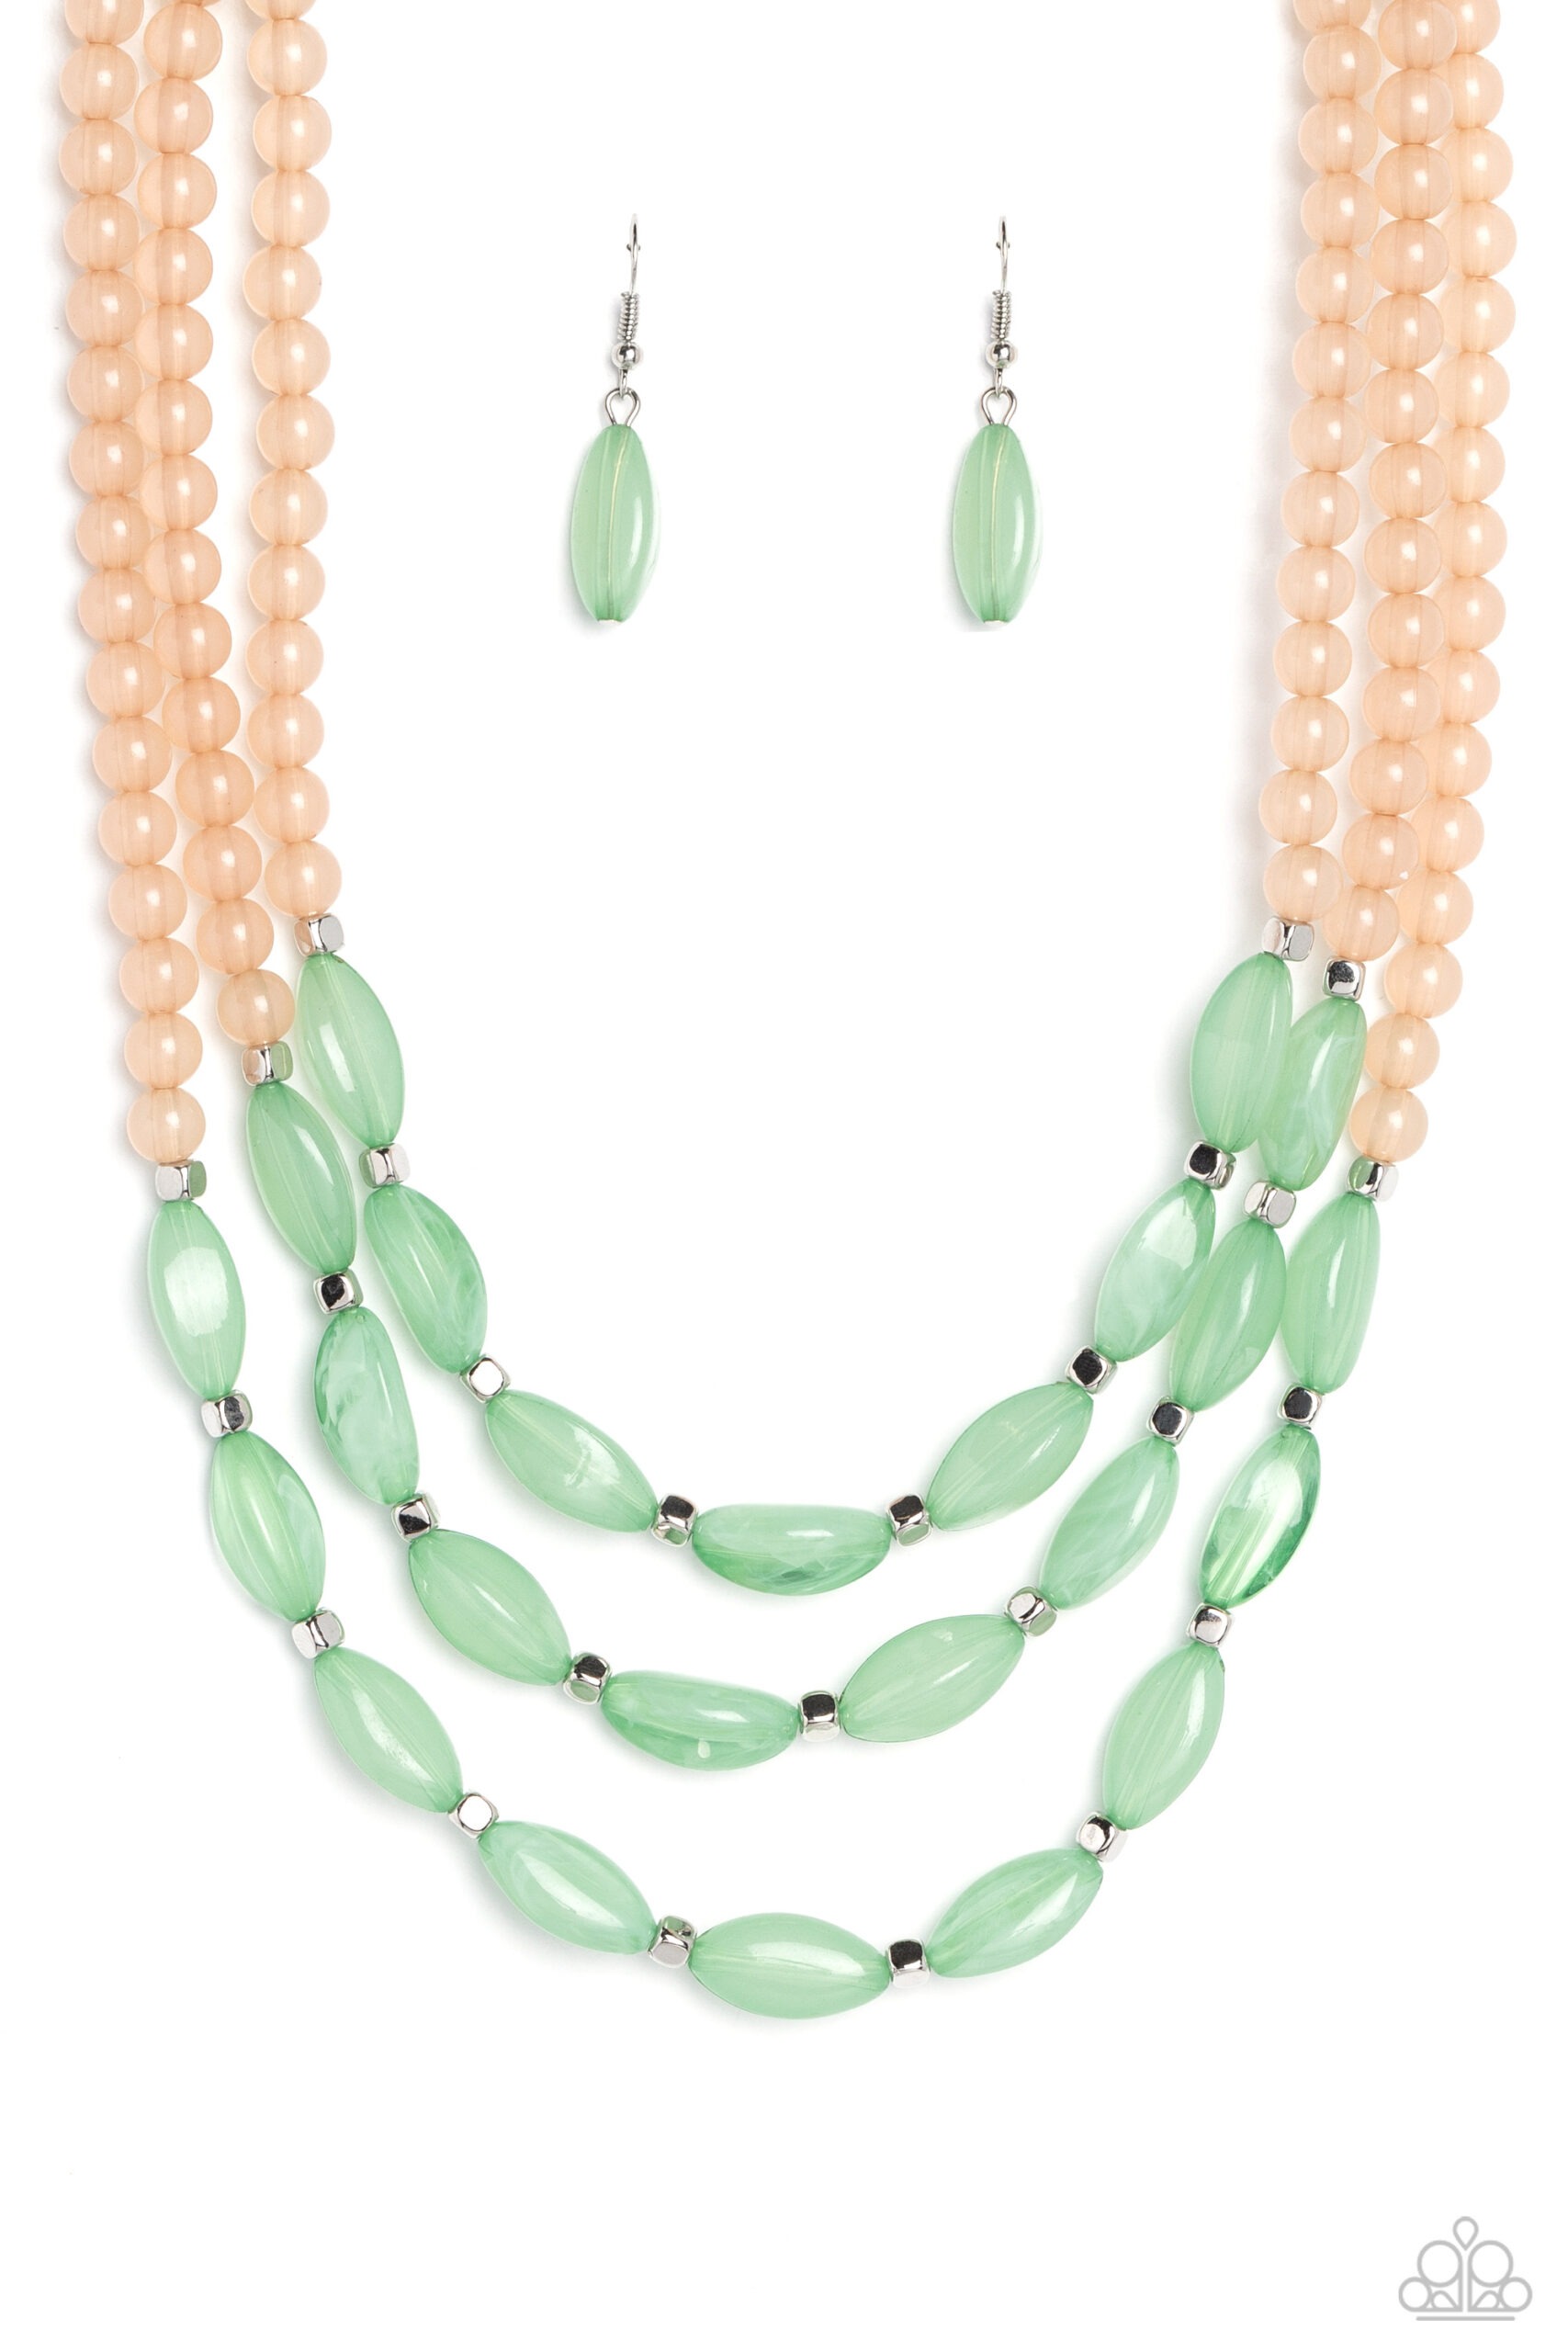 Necklace - I BEAD You Now - Green